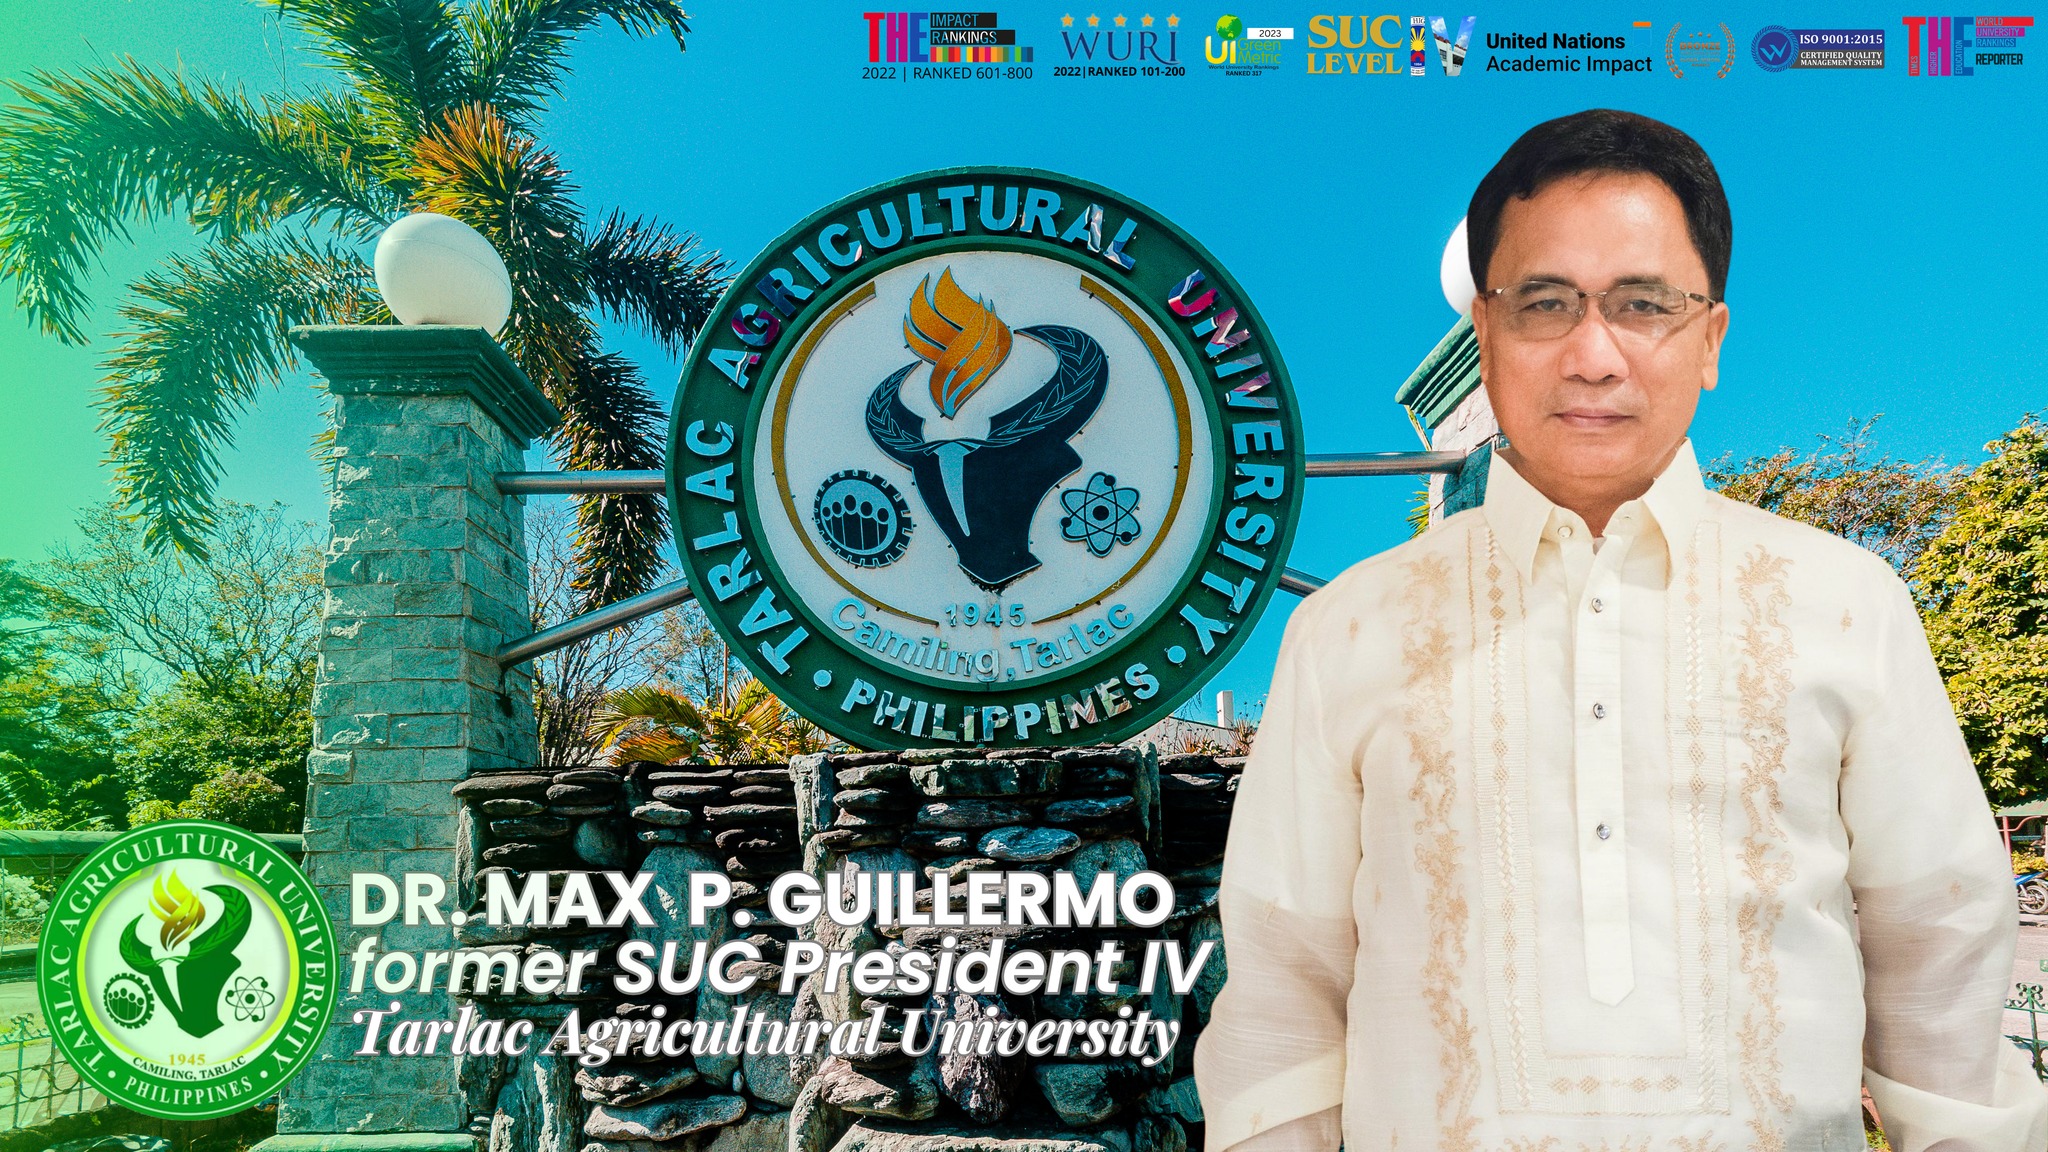 𝐔𝐍𝐈𝐕𝐄𝐑𝐒𝐈𝐓𝐘 𝐁𝐔𝐋𝐋𝐄𝐓𝐈𝐍 | Tarlac Agricultural University Dr. Guillermo